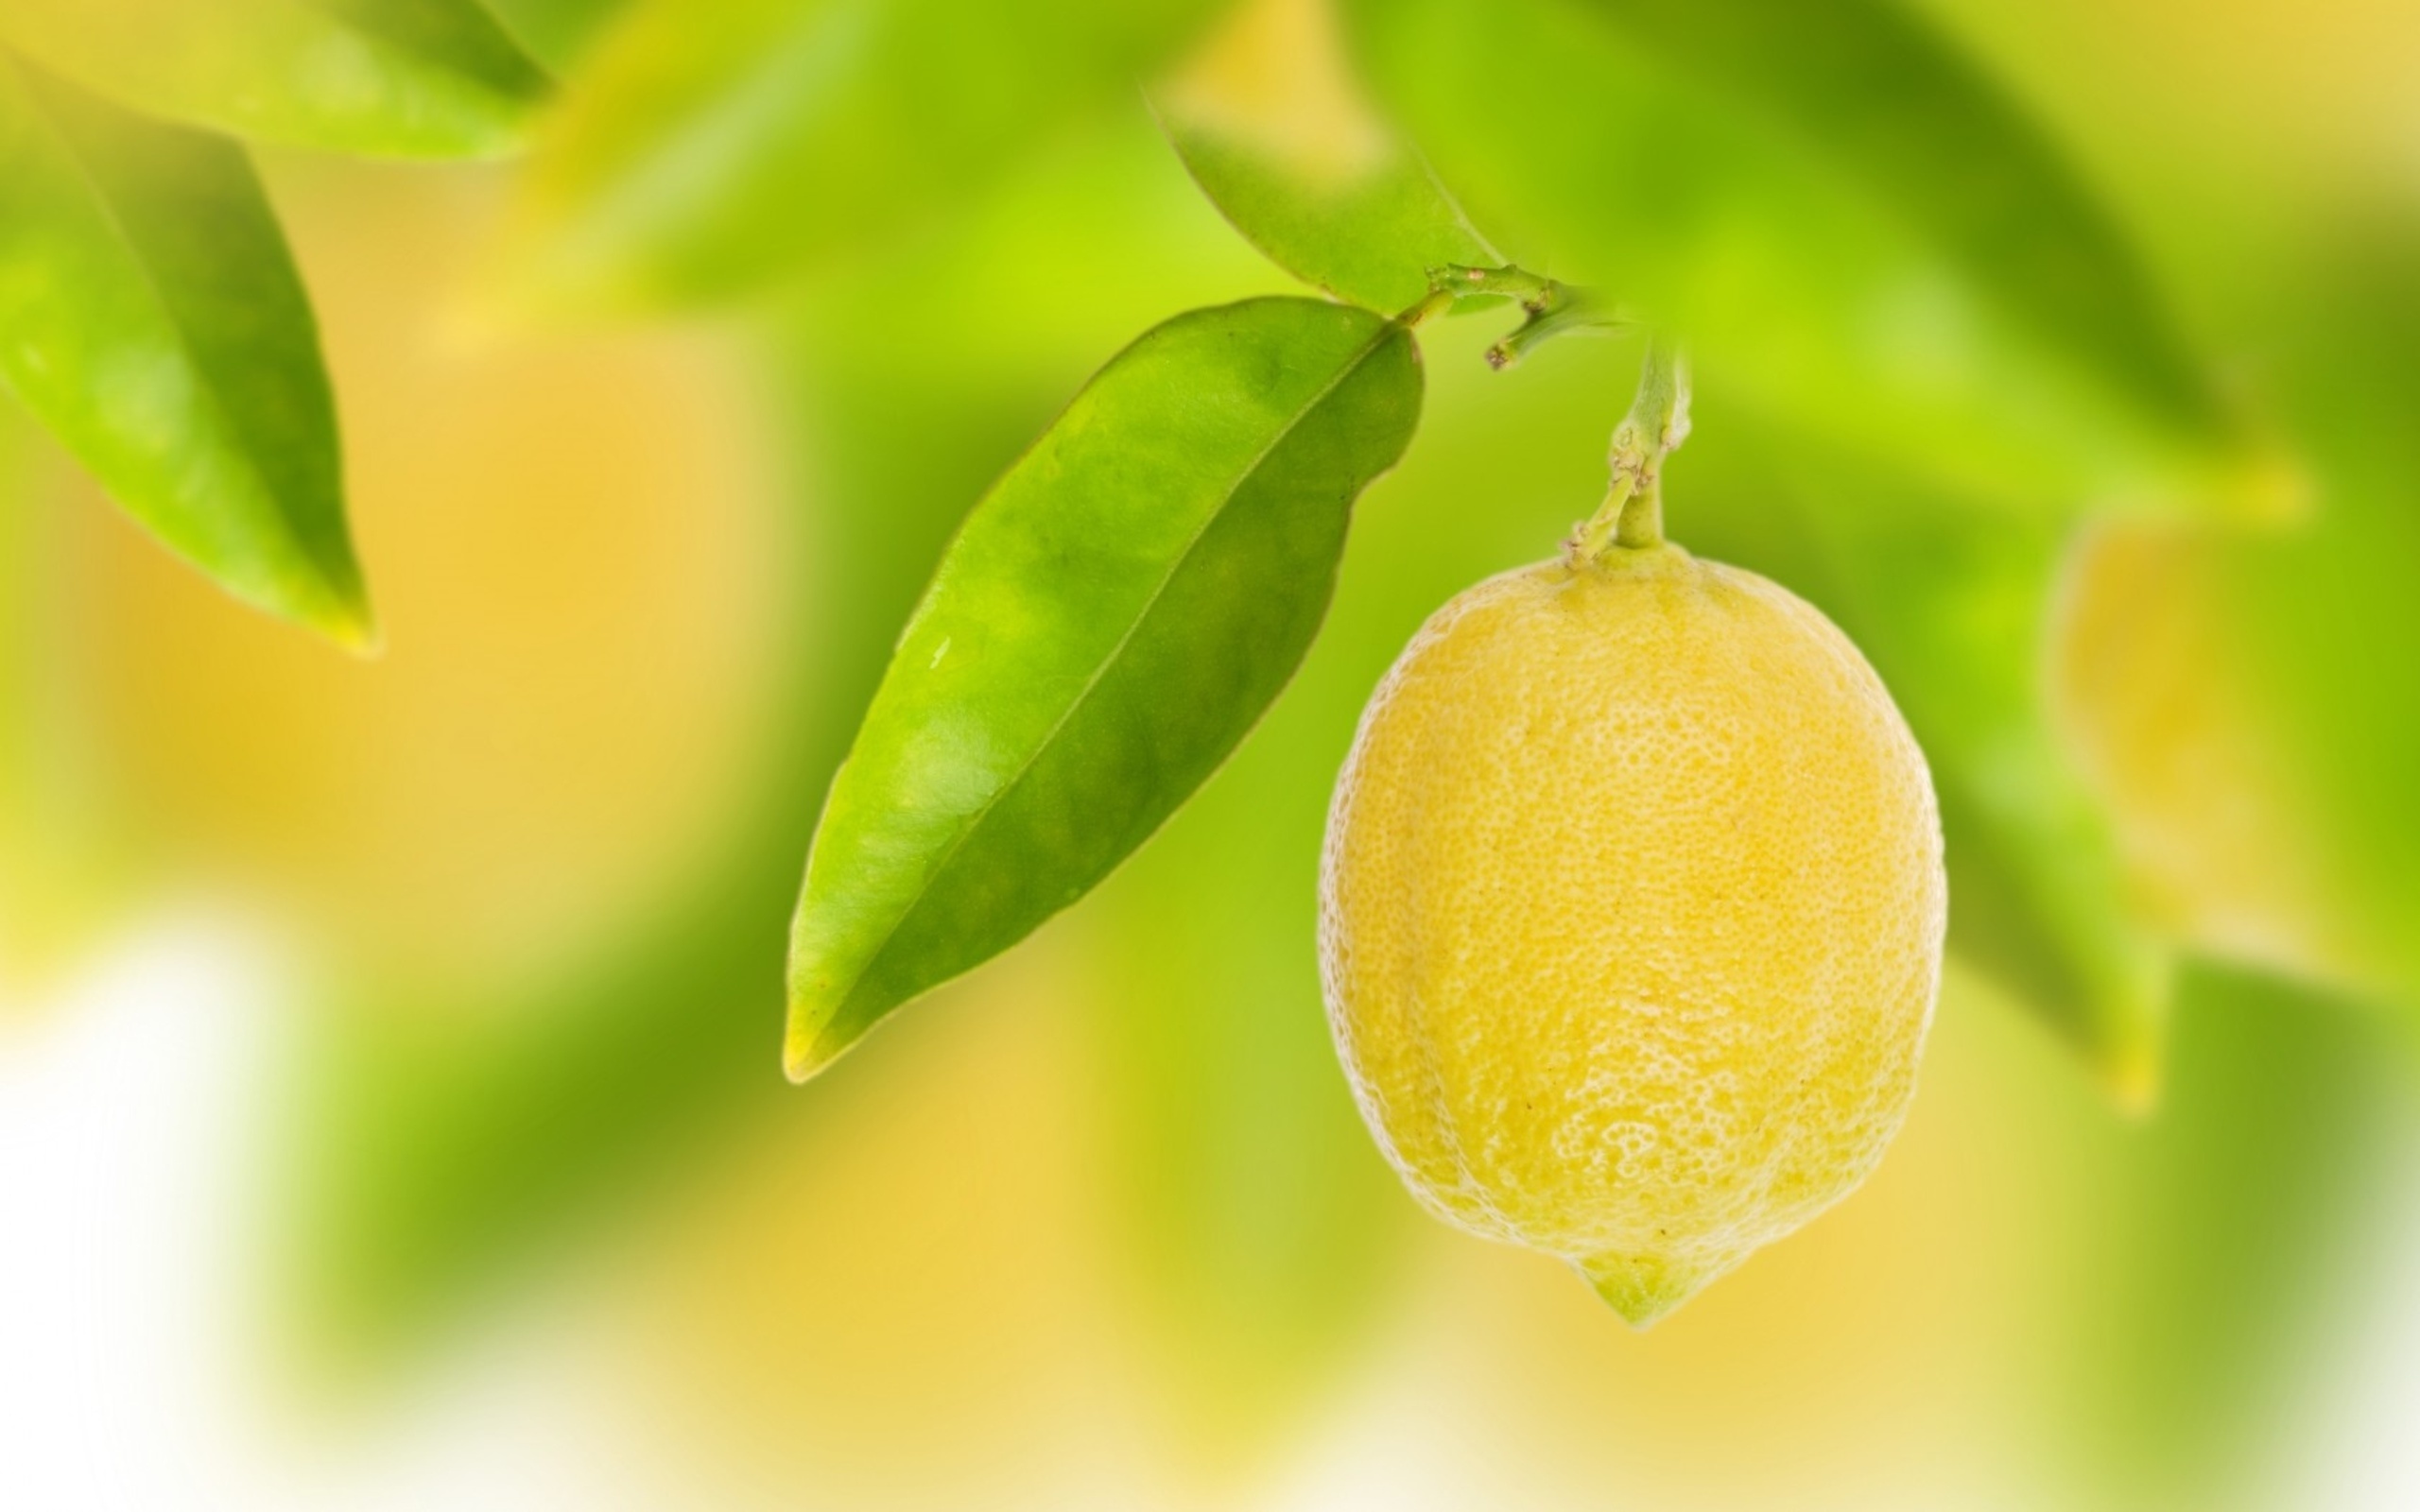 Lemon: Fruit, Used in a wide variety of foods and drinks. 2560x1600 HD Wallpaper.